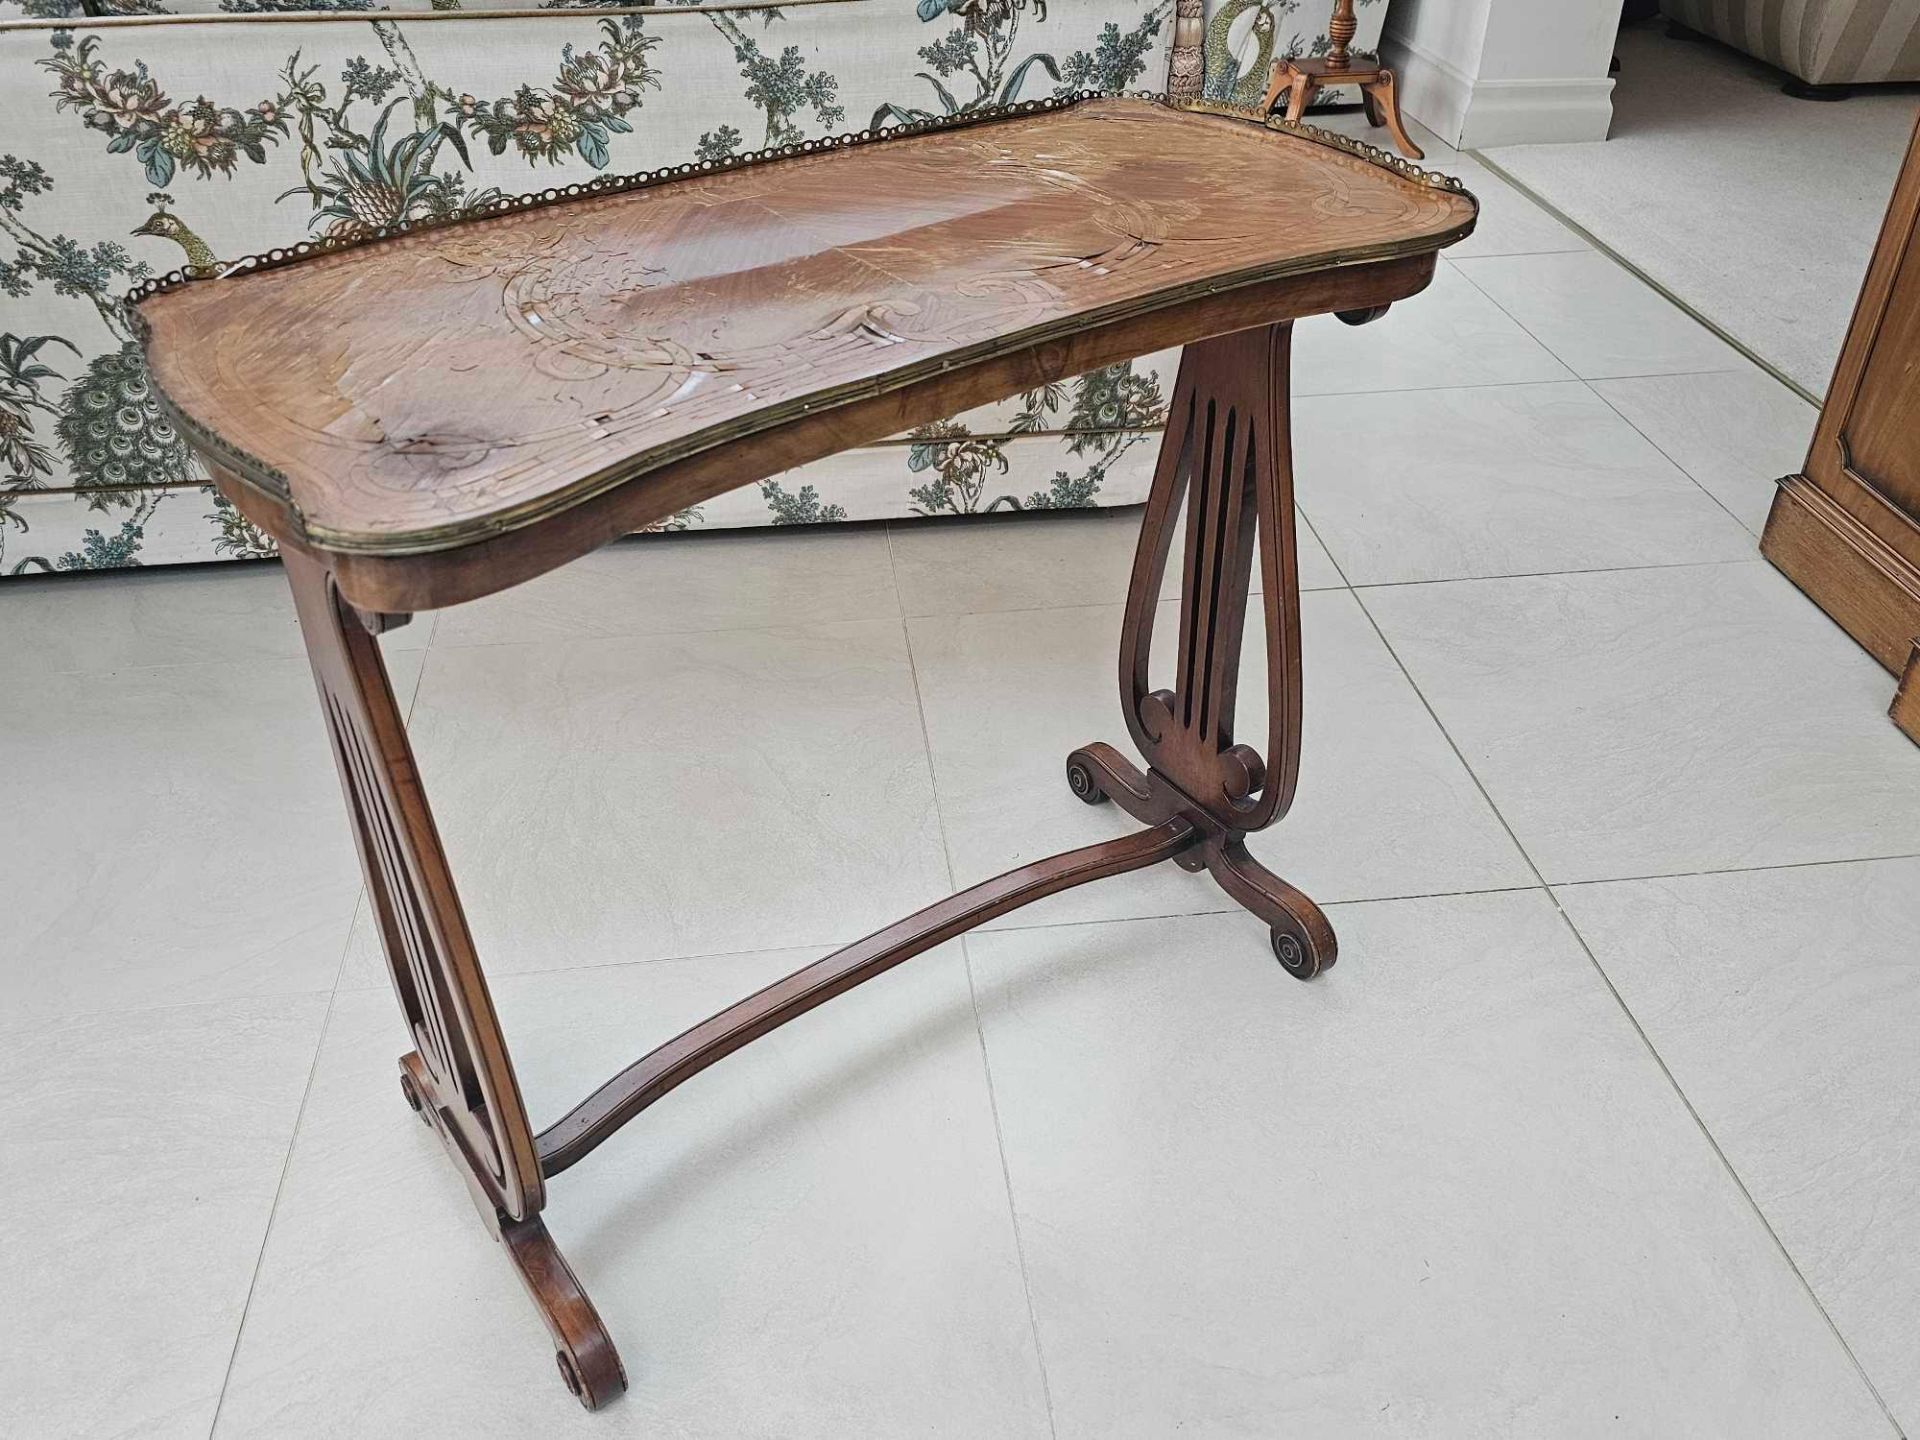 A Louis XVI Style Kingswood And Tulipwood Banded Side Table The Shaped Decorated Top With A